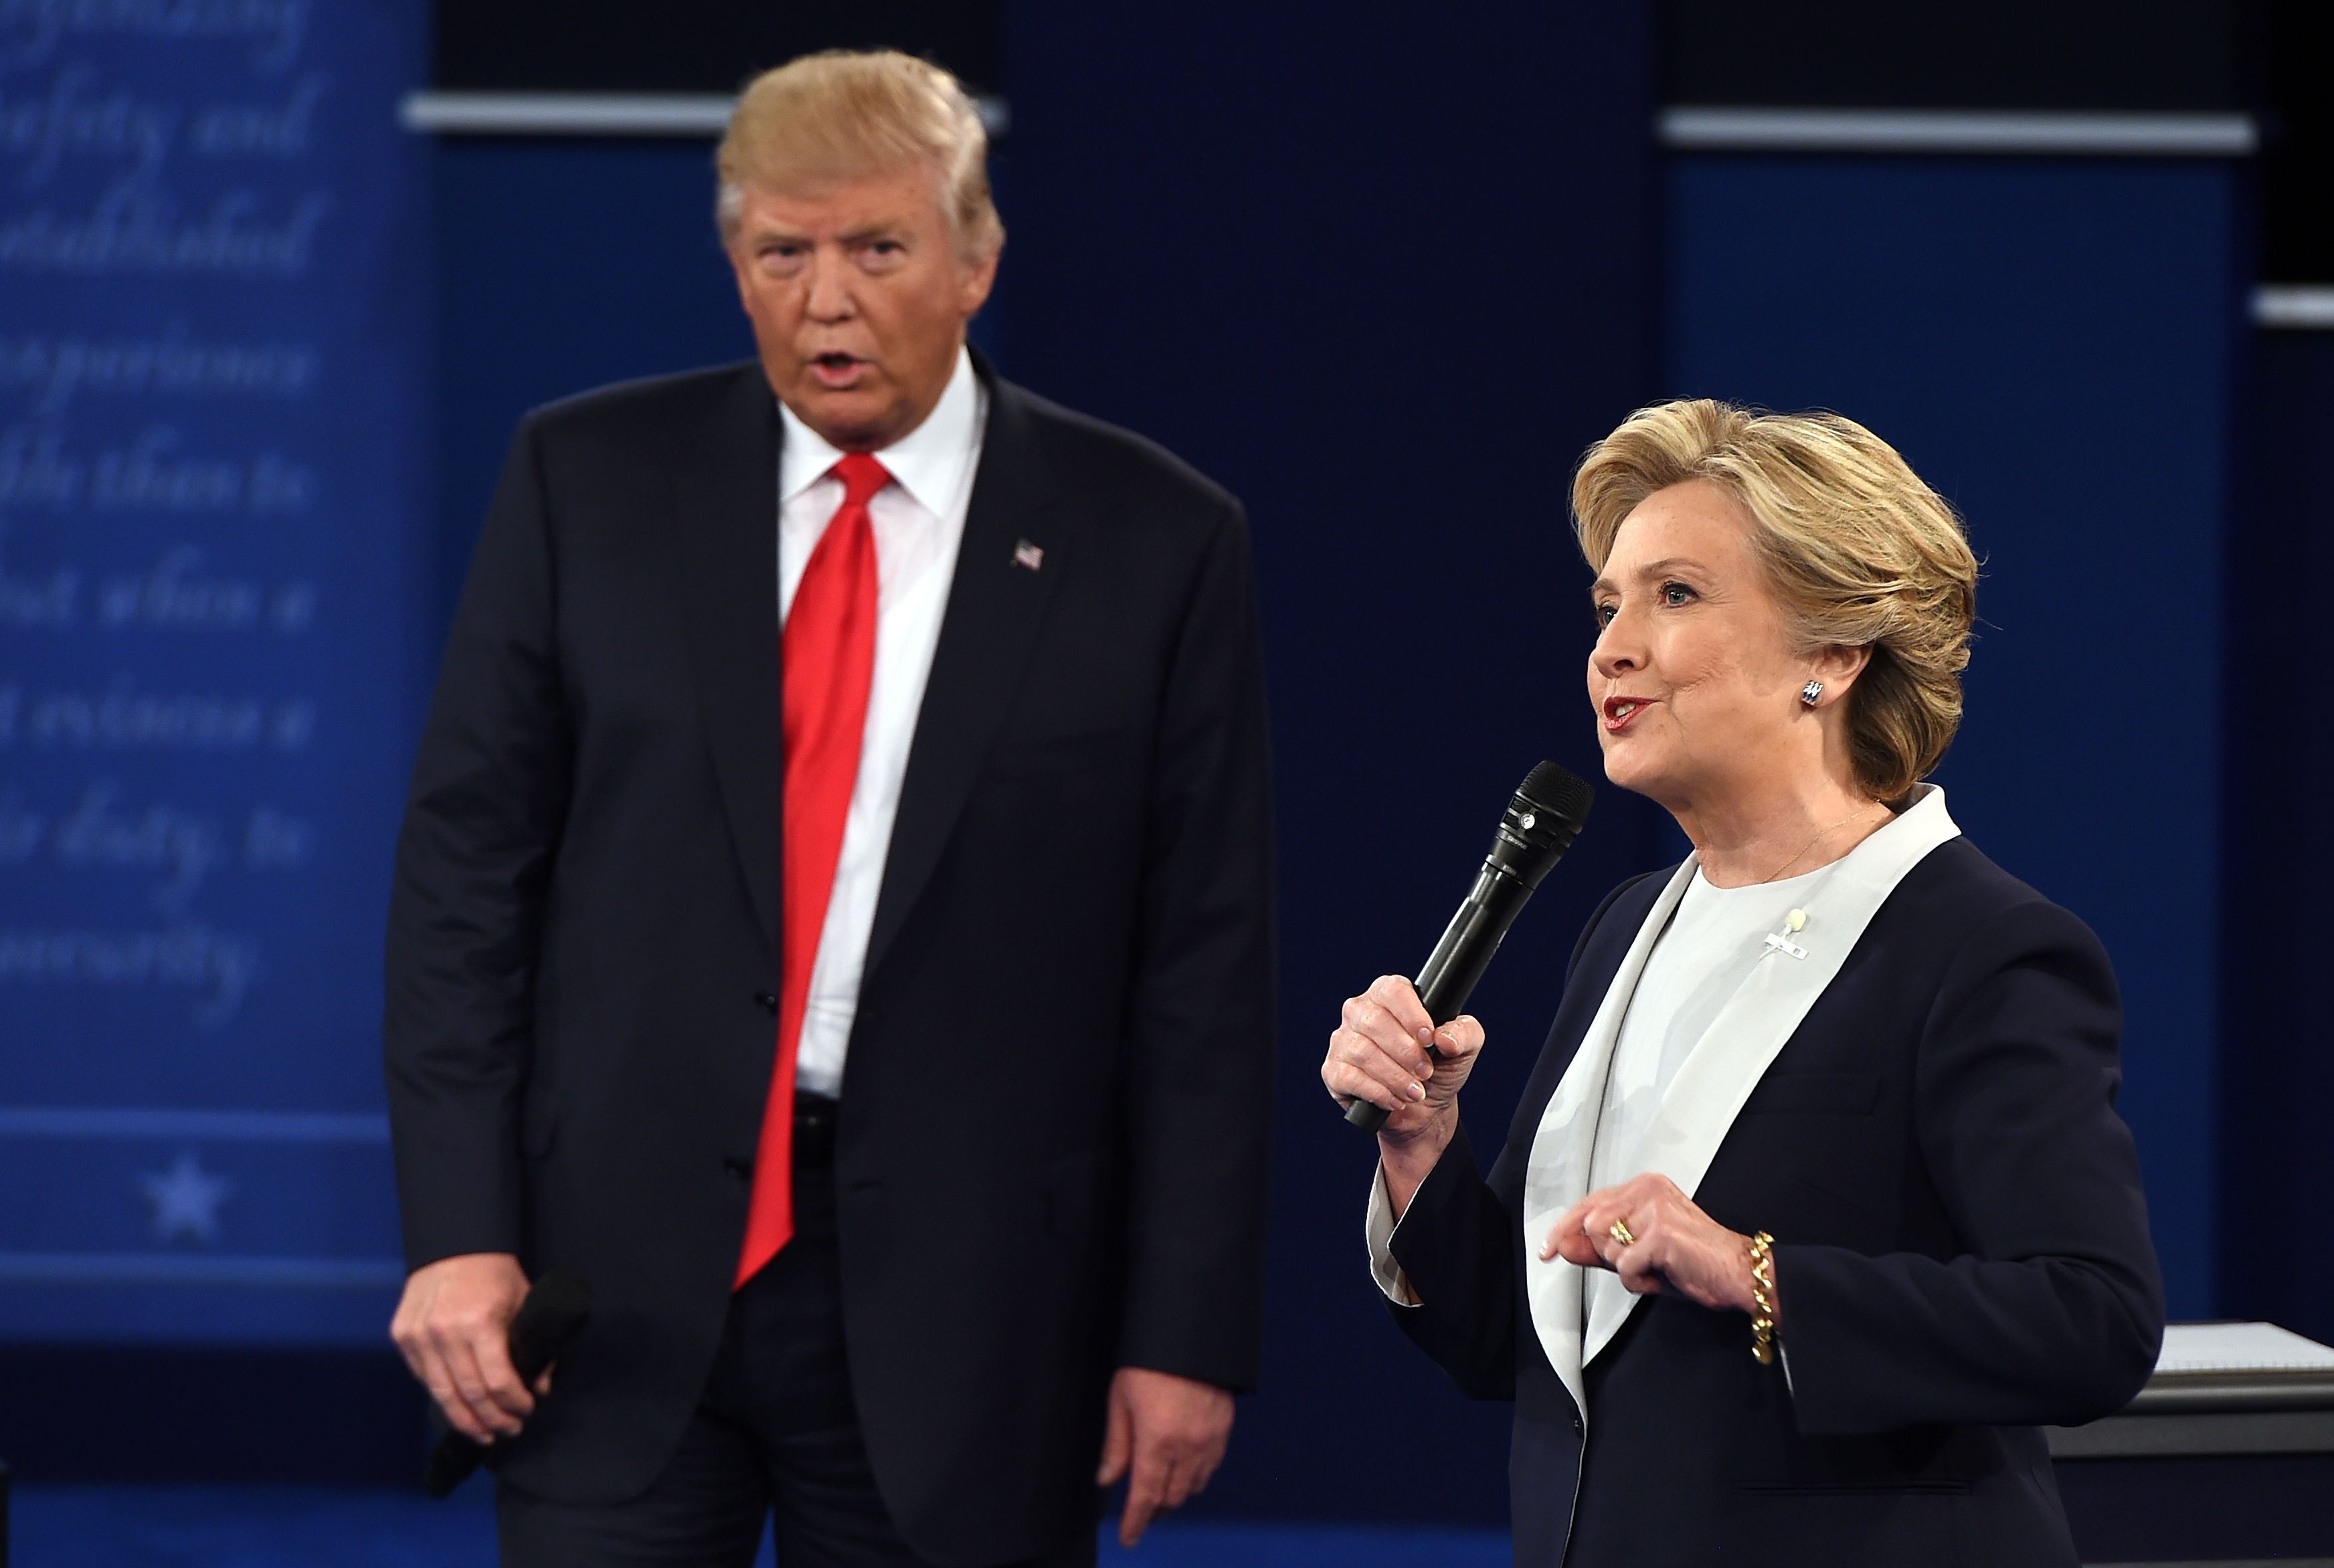 Democratic presidential candidate Hillary Clinton and Republican presidential candidate Donald Trump debate during the second presidential debate at Washington University in St. Louis on Oct. 9, 2016.